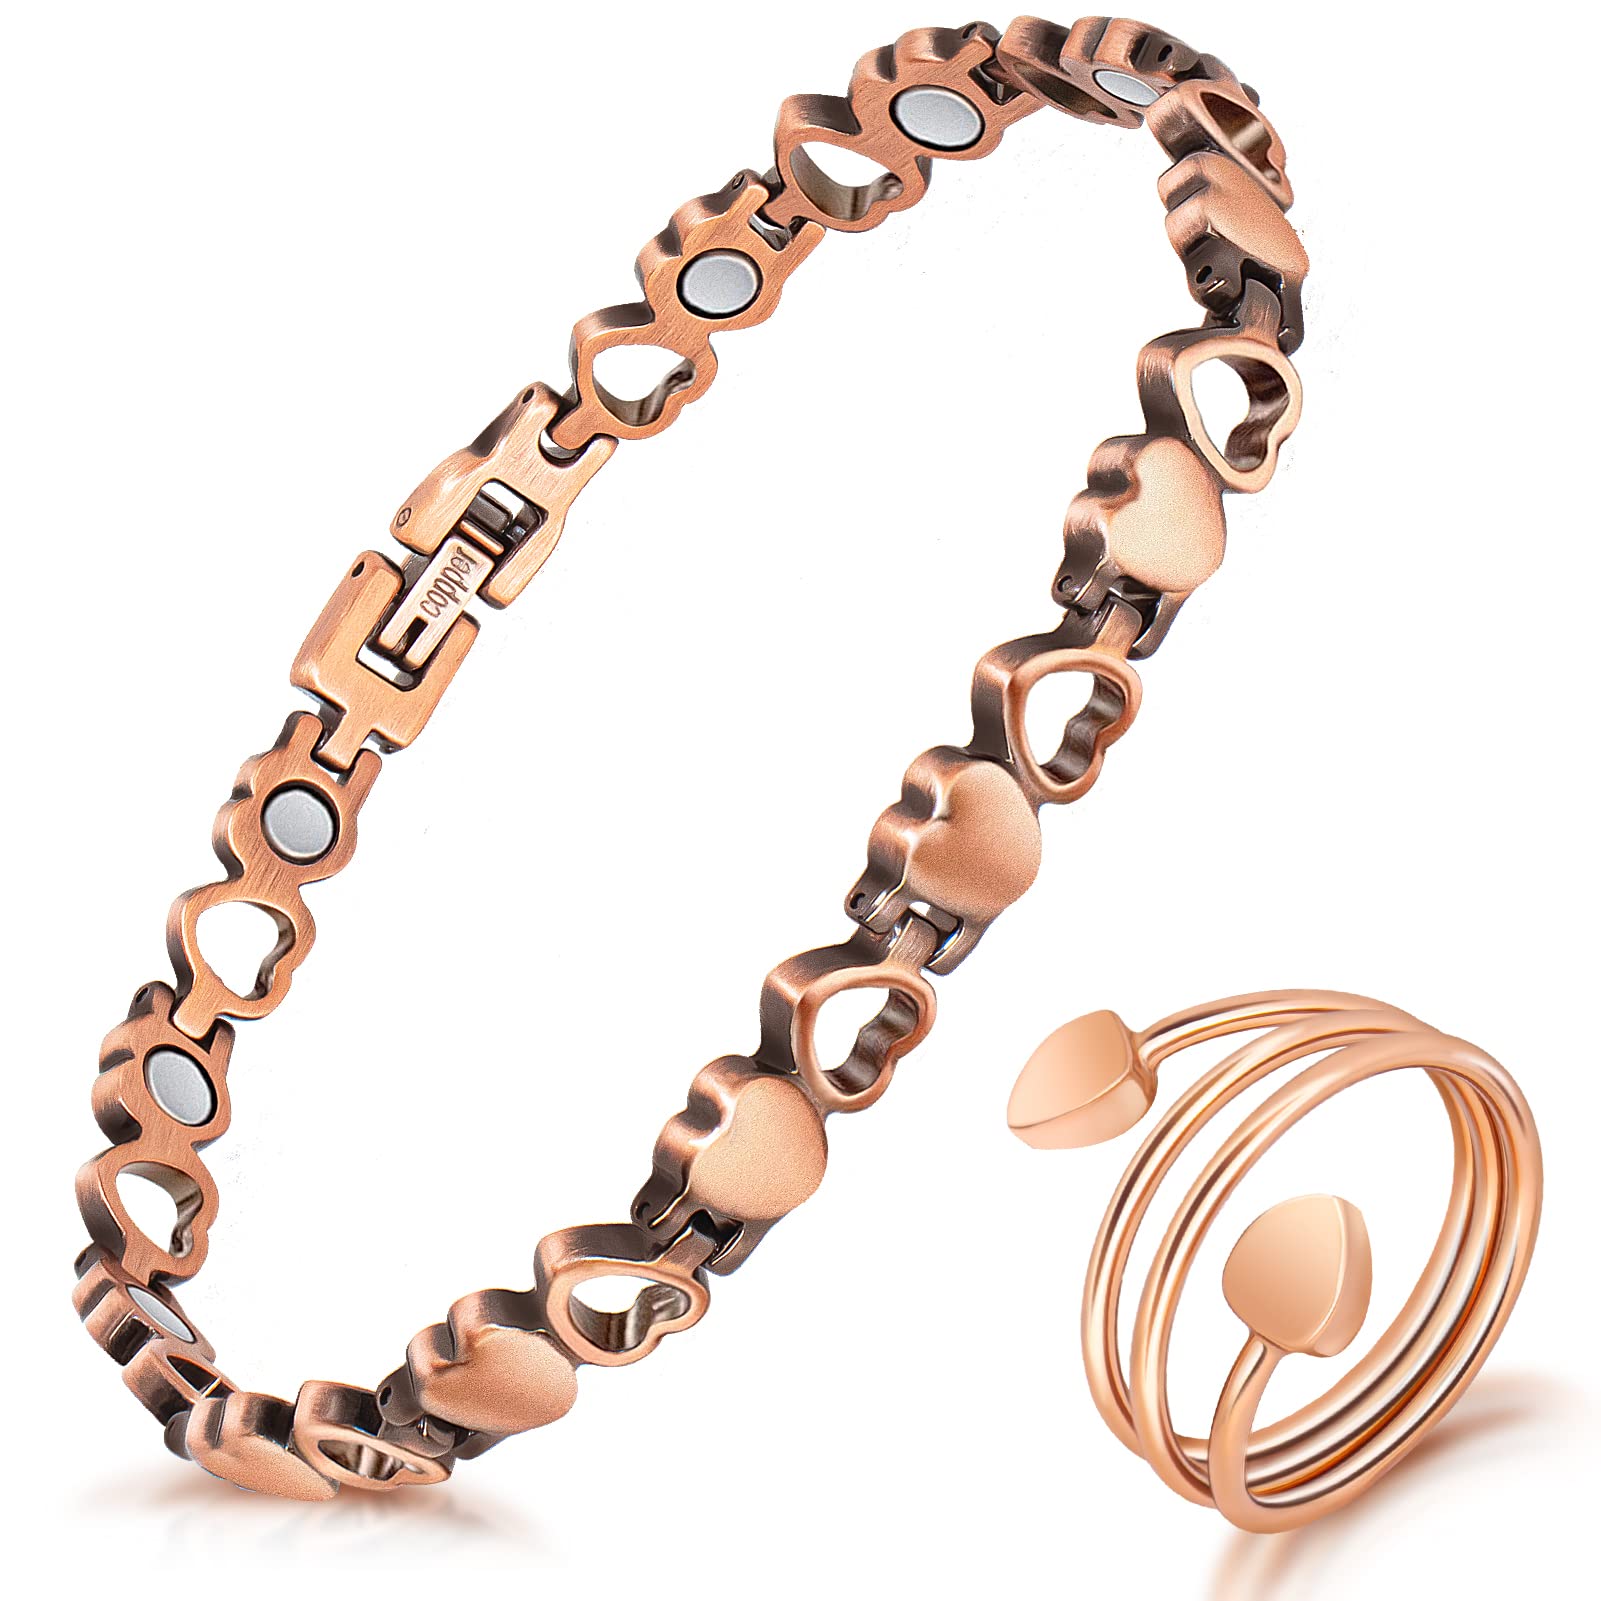 PURE SOLID COPPER Magnetic Bracelet Arthritis Pain Therapy Energy Cuff -  Cross - Simpson Advanced Chiropractic & Medical Center